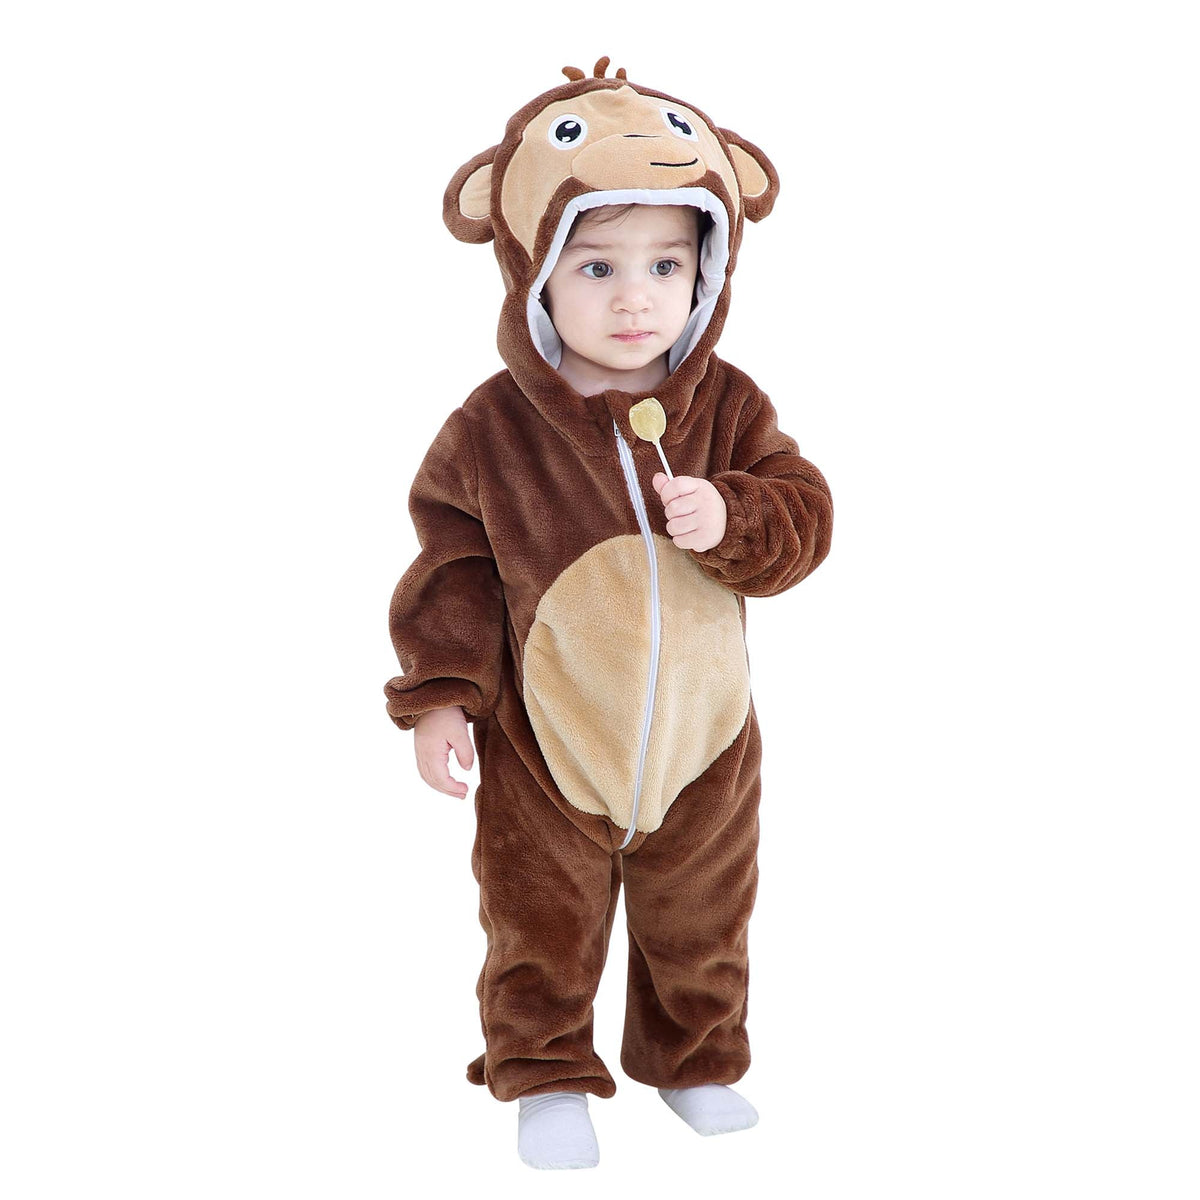 Seeing Red Inc. Costumes Little Monkey Costume for Babies and Toddlers, Jumpsuit with Hood